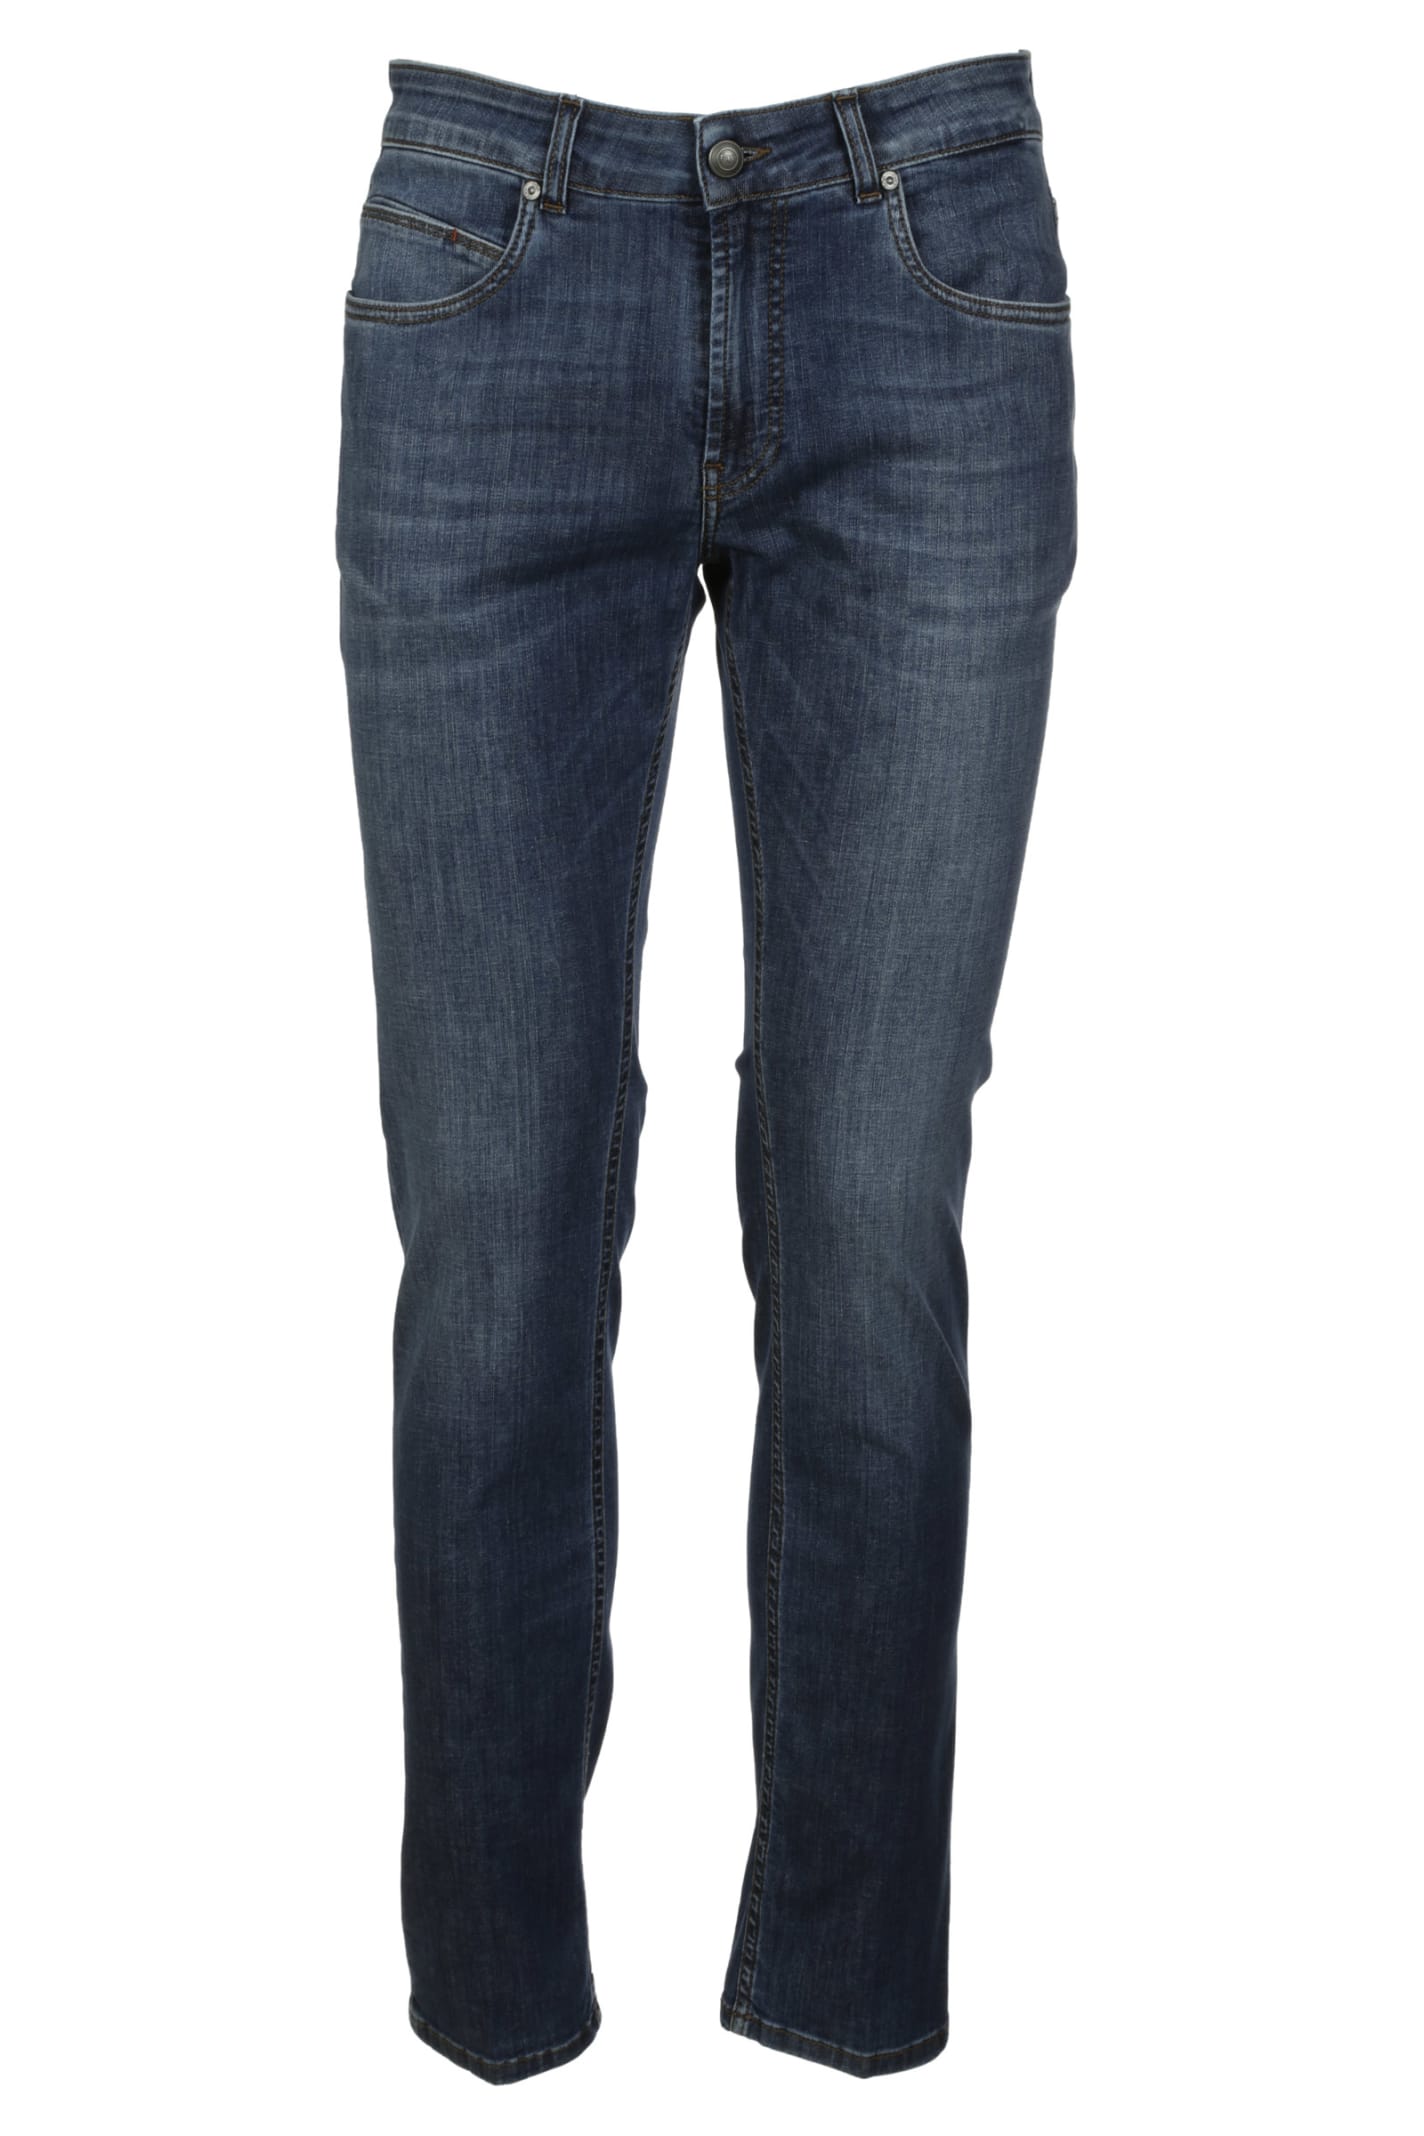 Fay Classic Slim Fit Jeans